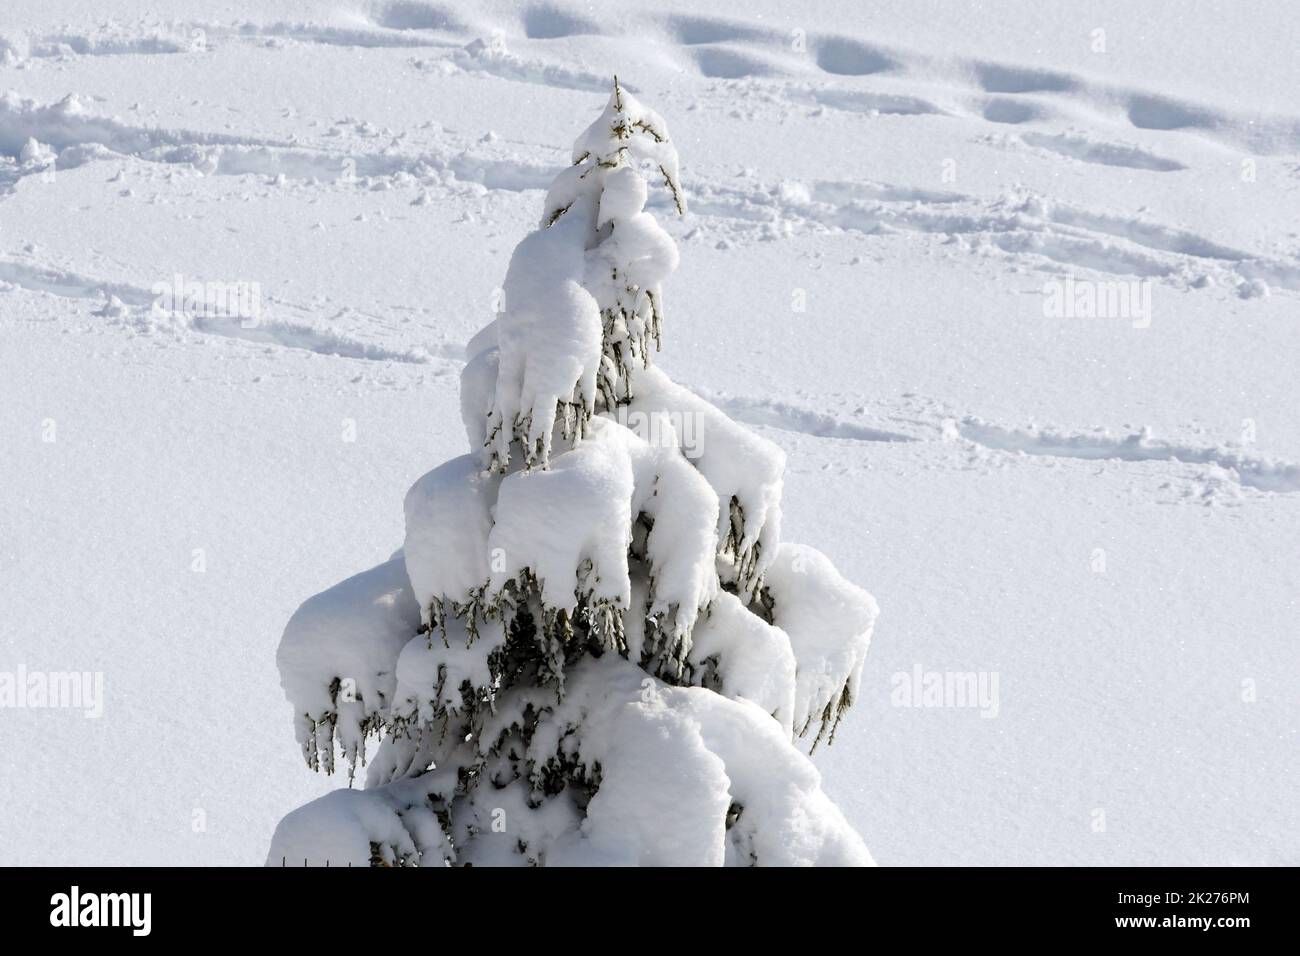 pine trees on which snow falls, icicles formed on pine trees, winter landscape pictures Stock Photo